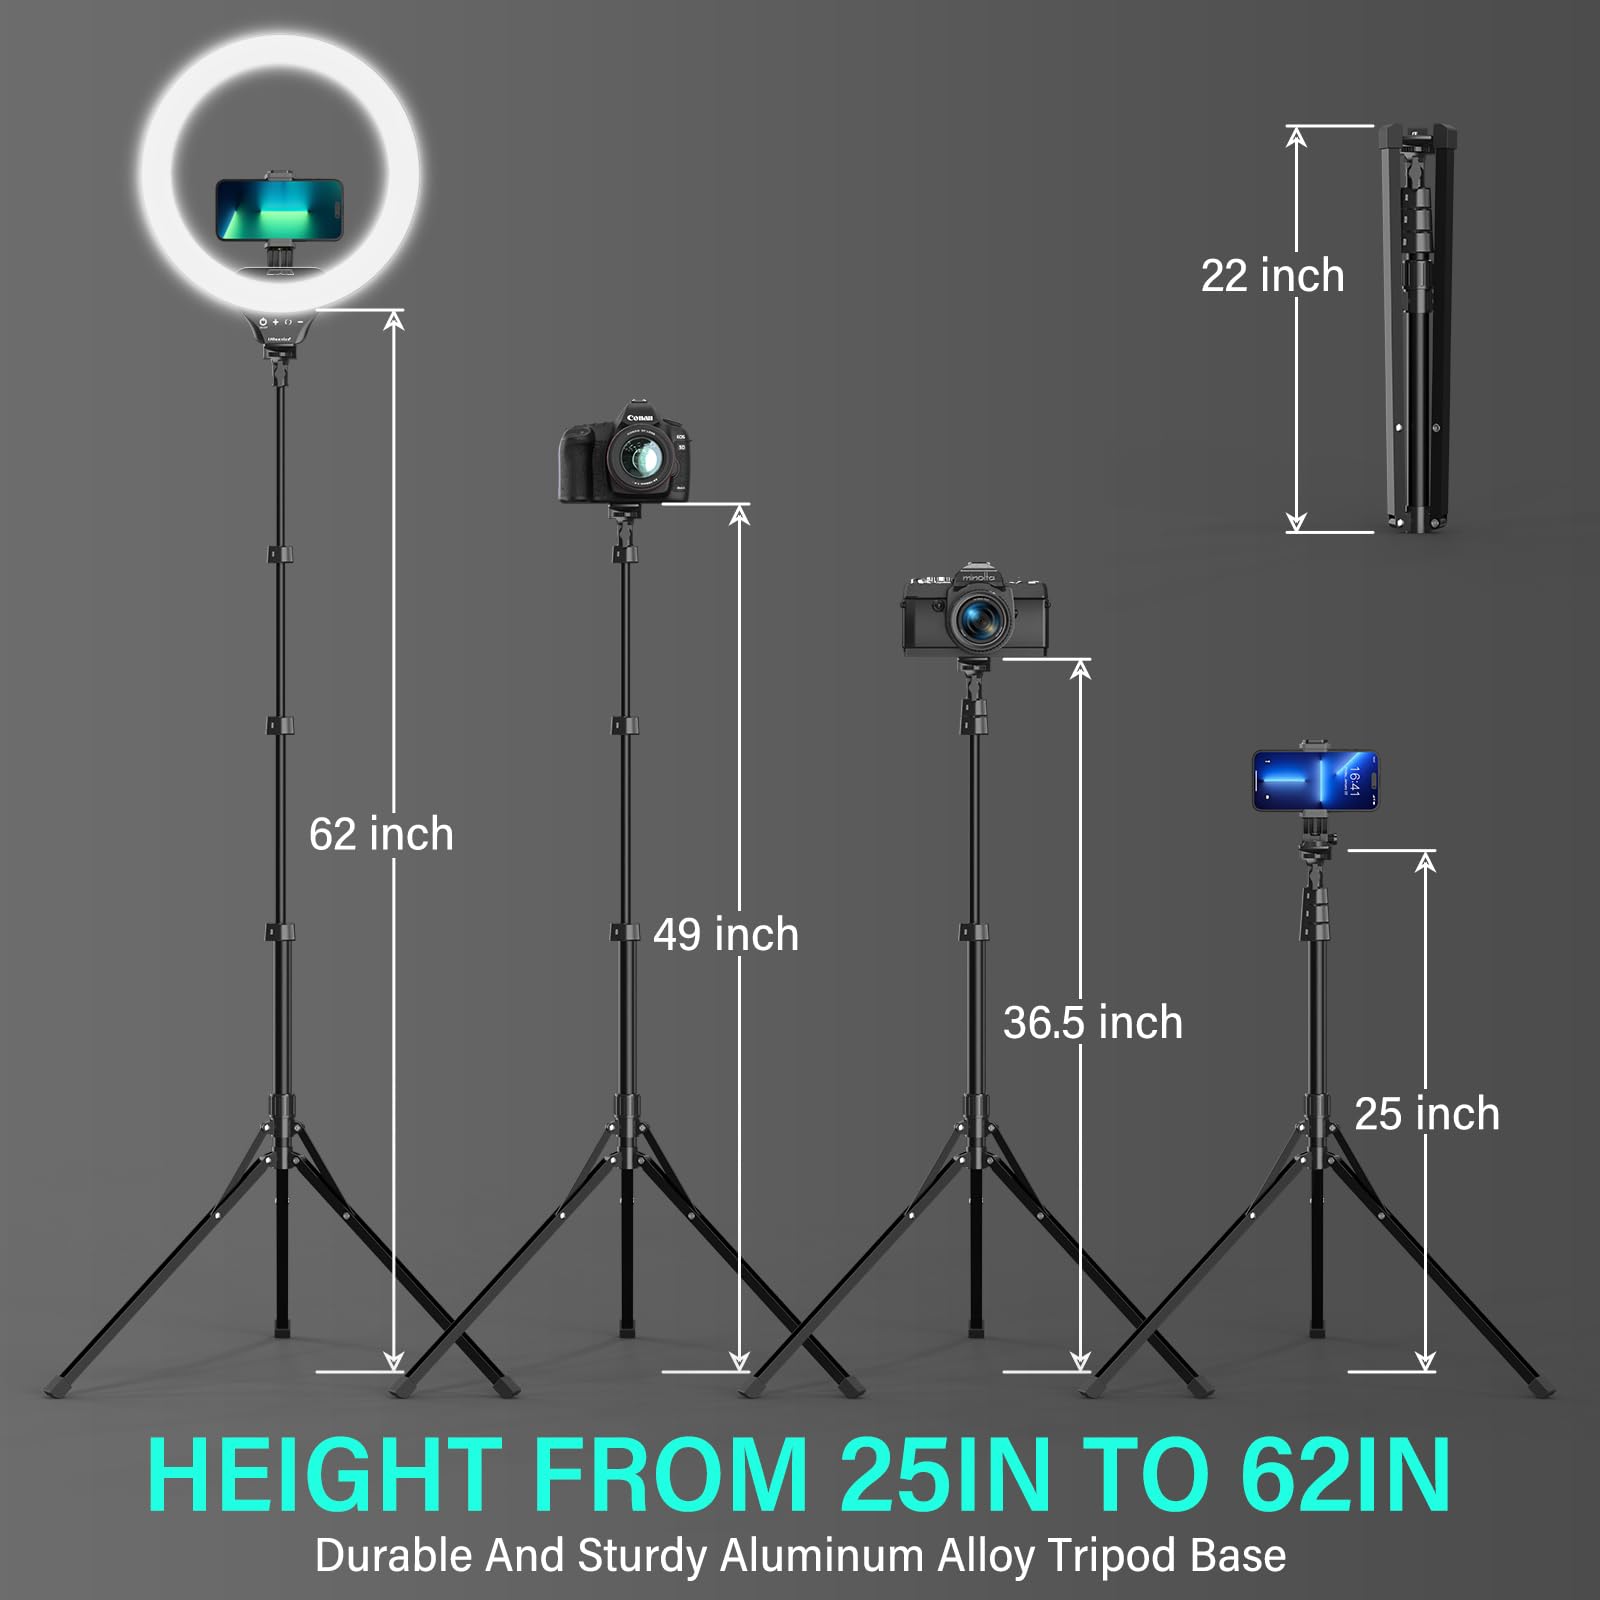 UBeesize 14'' Foldable Ring Light with 62'' Tripod Stand and Phone Holder, LED Selfie RingLight for iPhone with Remote, Circle Light for Tiktok/YouTube/Photography/Makeup/Live Stream